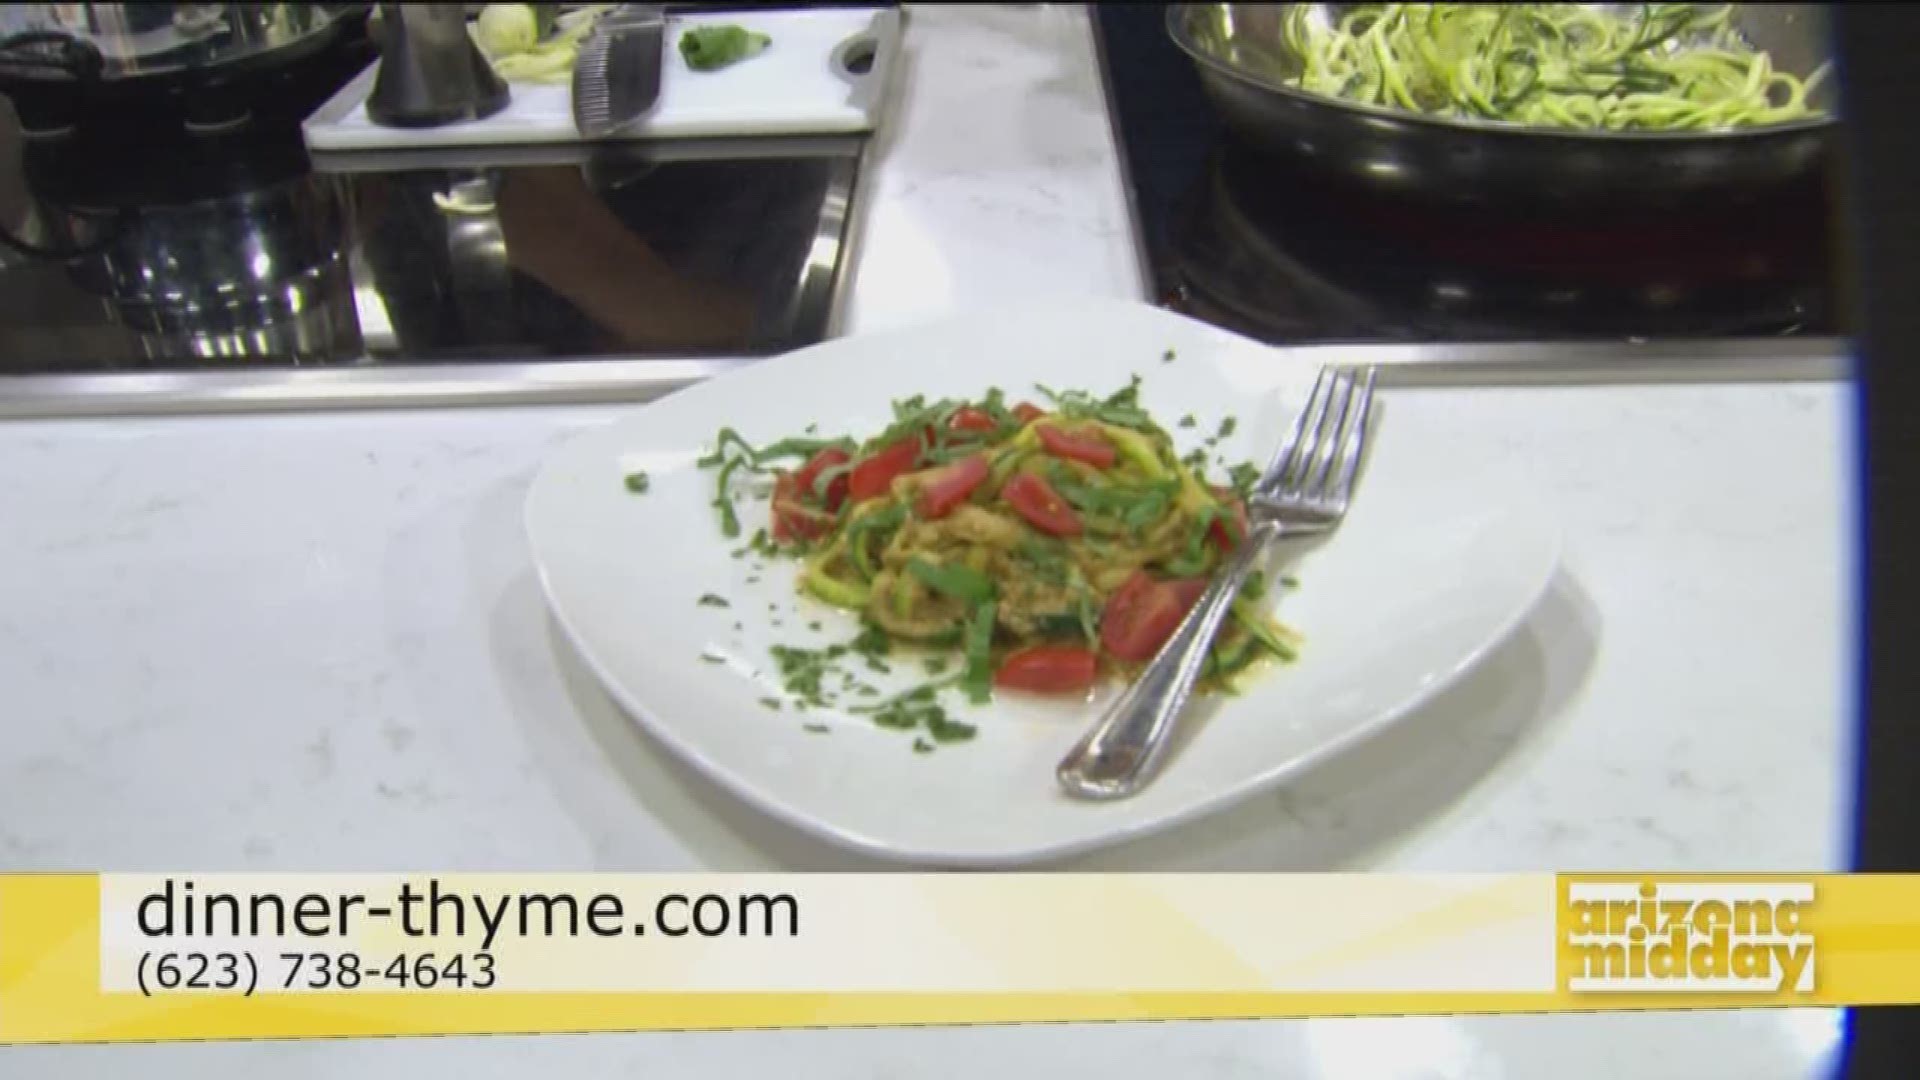 Chef Lisa Brisch of Dinner Thyme Personal Chef Service teaches us how make tomato herb pesto and zucchini noodles!